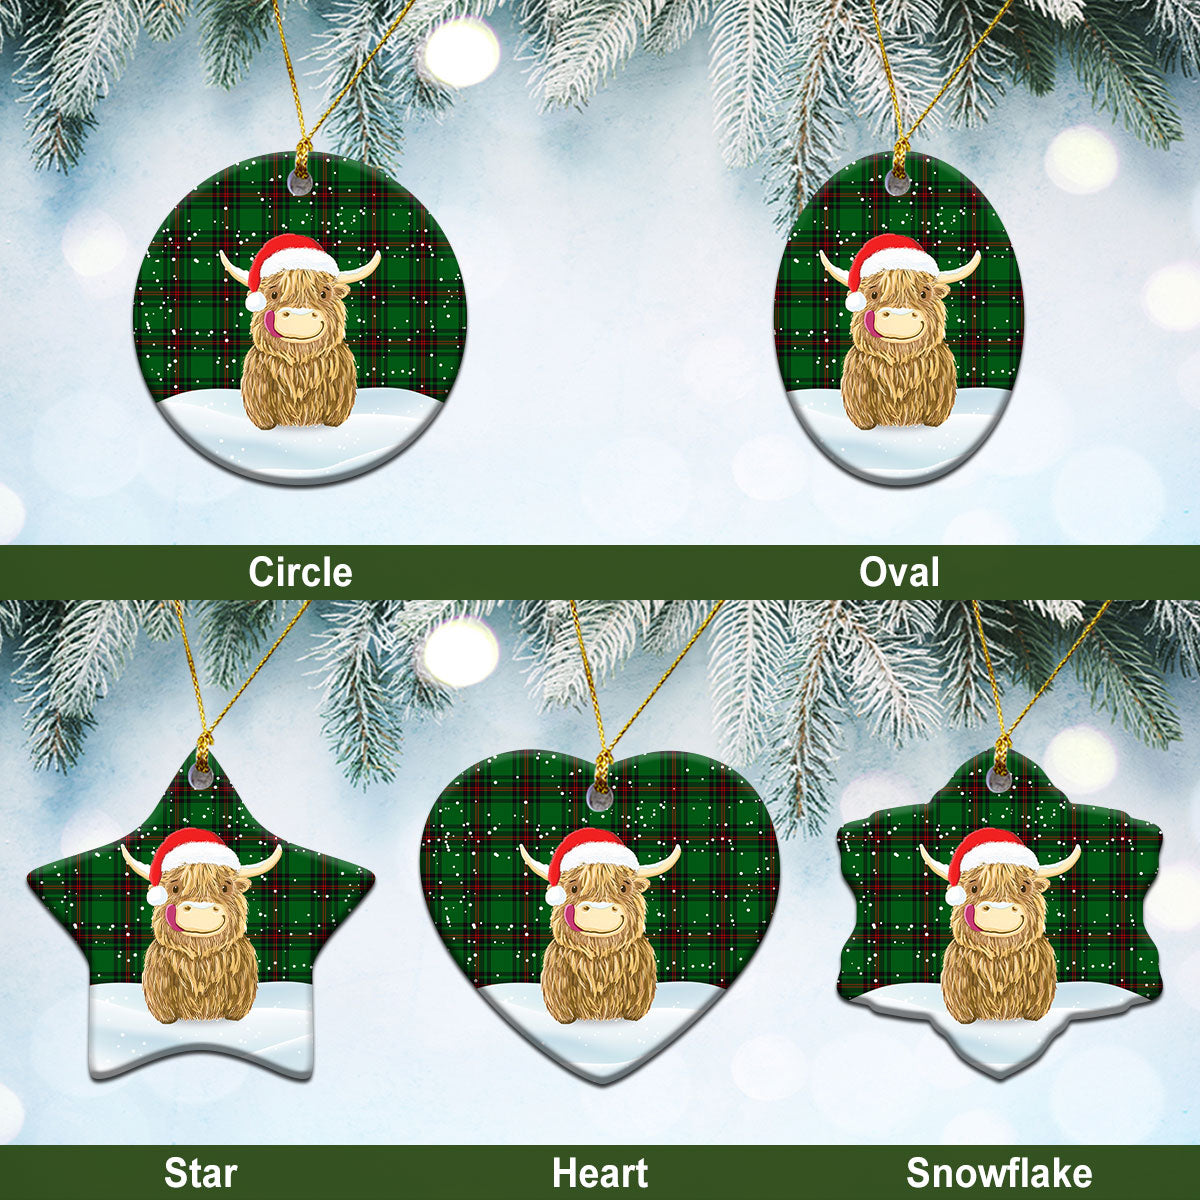 Anstruther Tartan Christmas Ceramic Ornament - Highland Cows Style